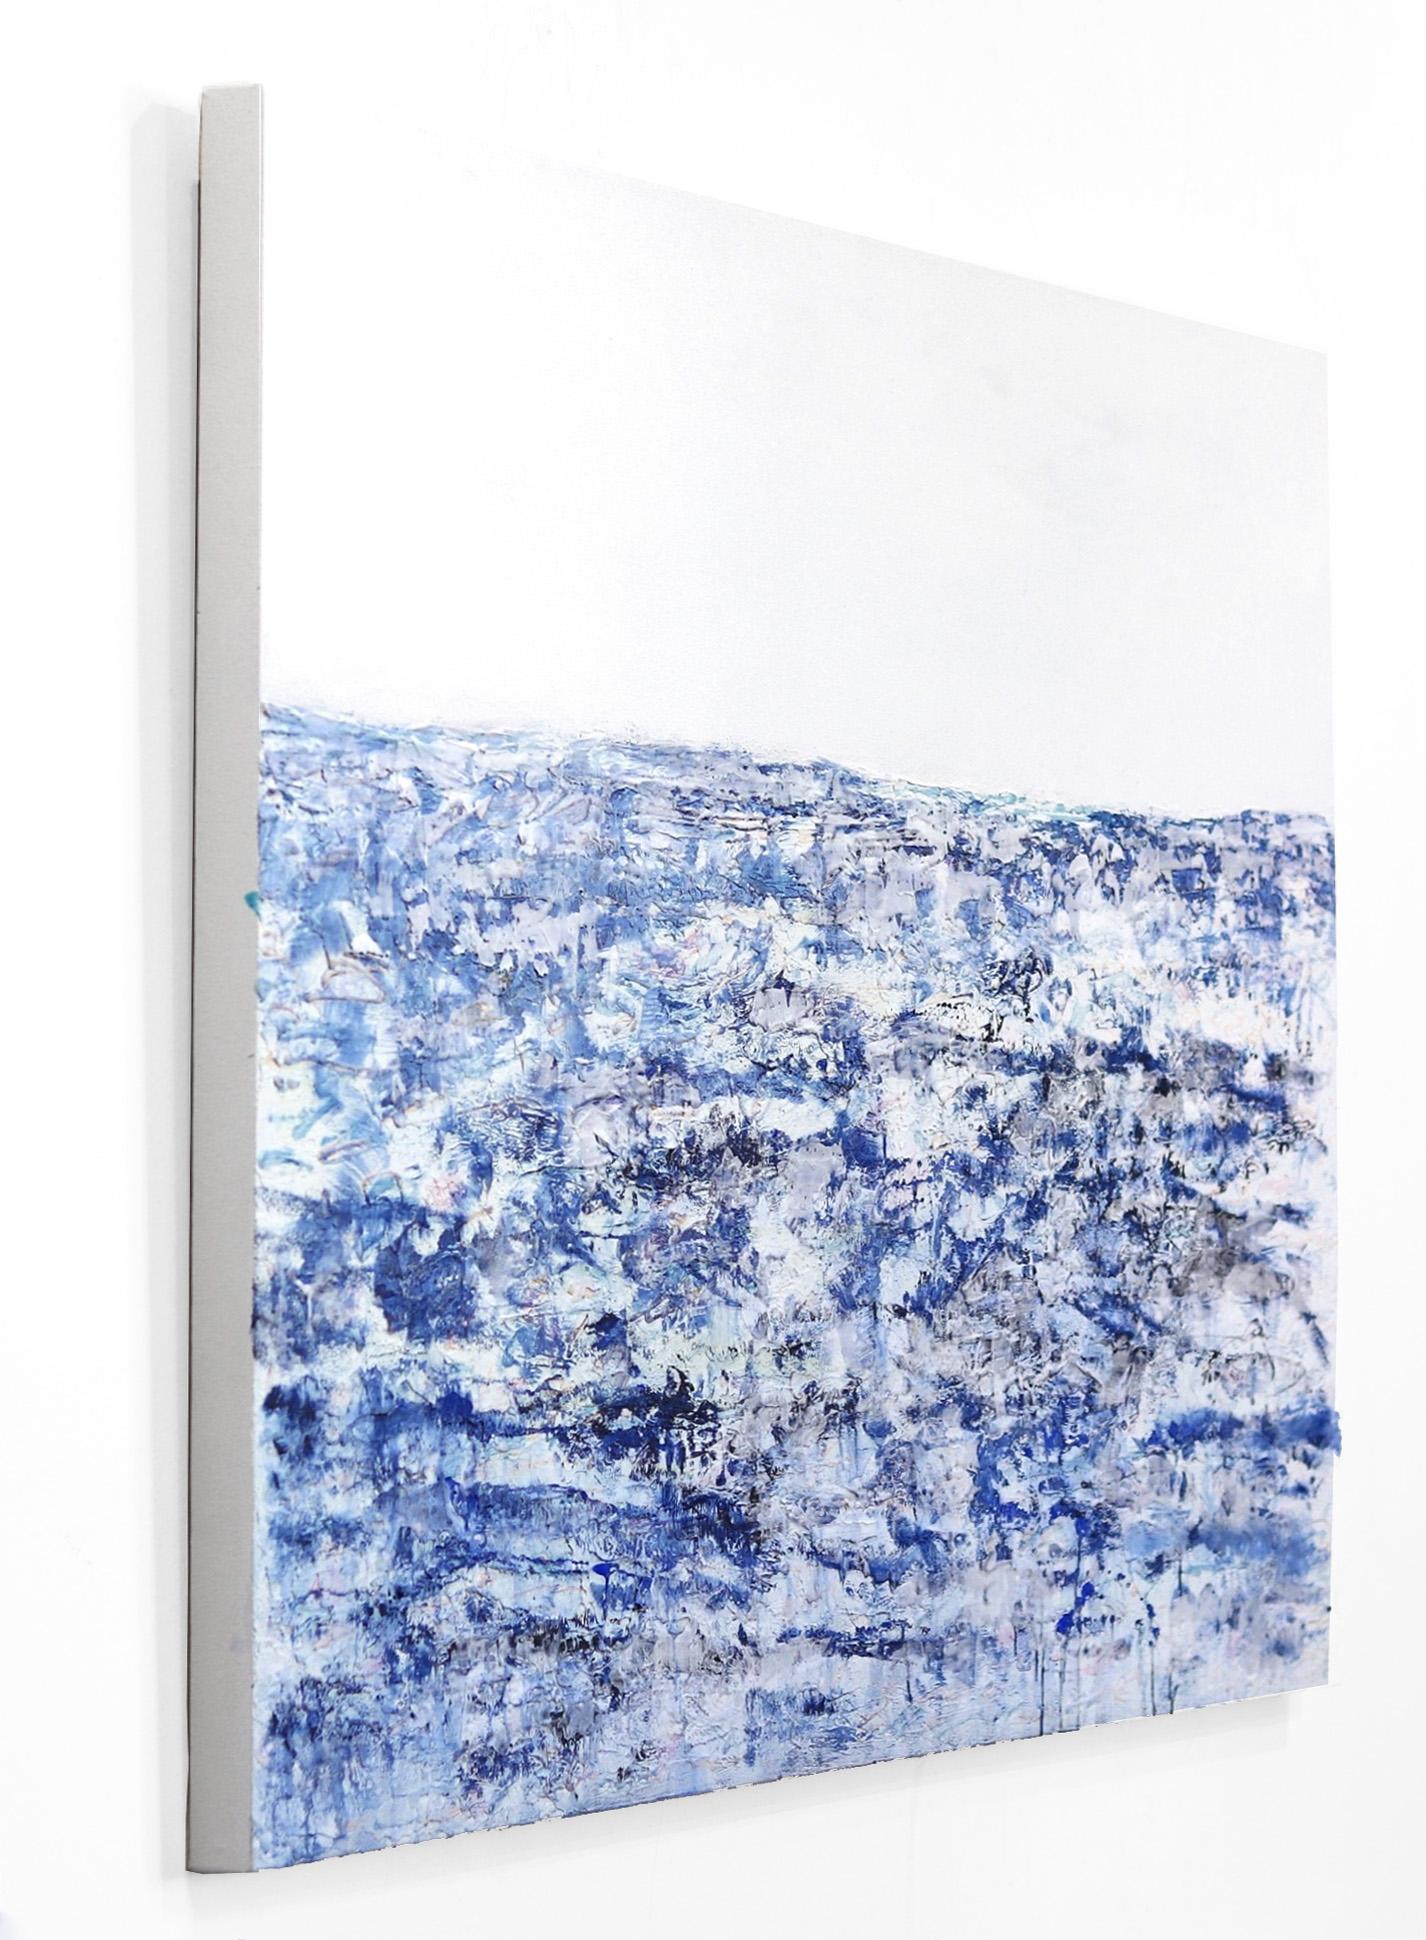 Pelican Bay -- Textured White Blue Waterfall Abstract Minimalist Painting - Purple Abstract Painting by Clara Berta